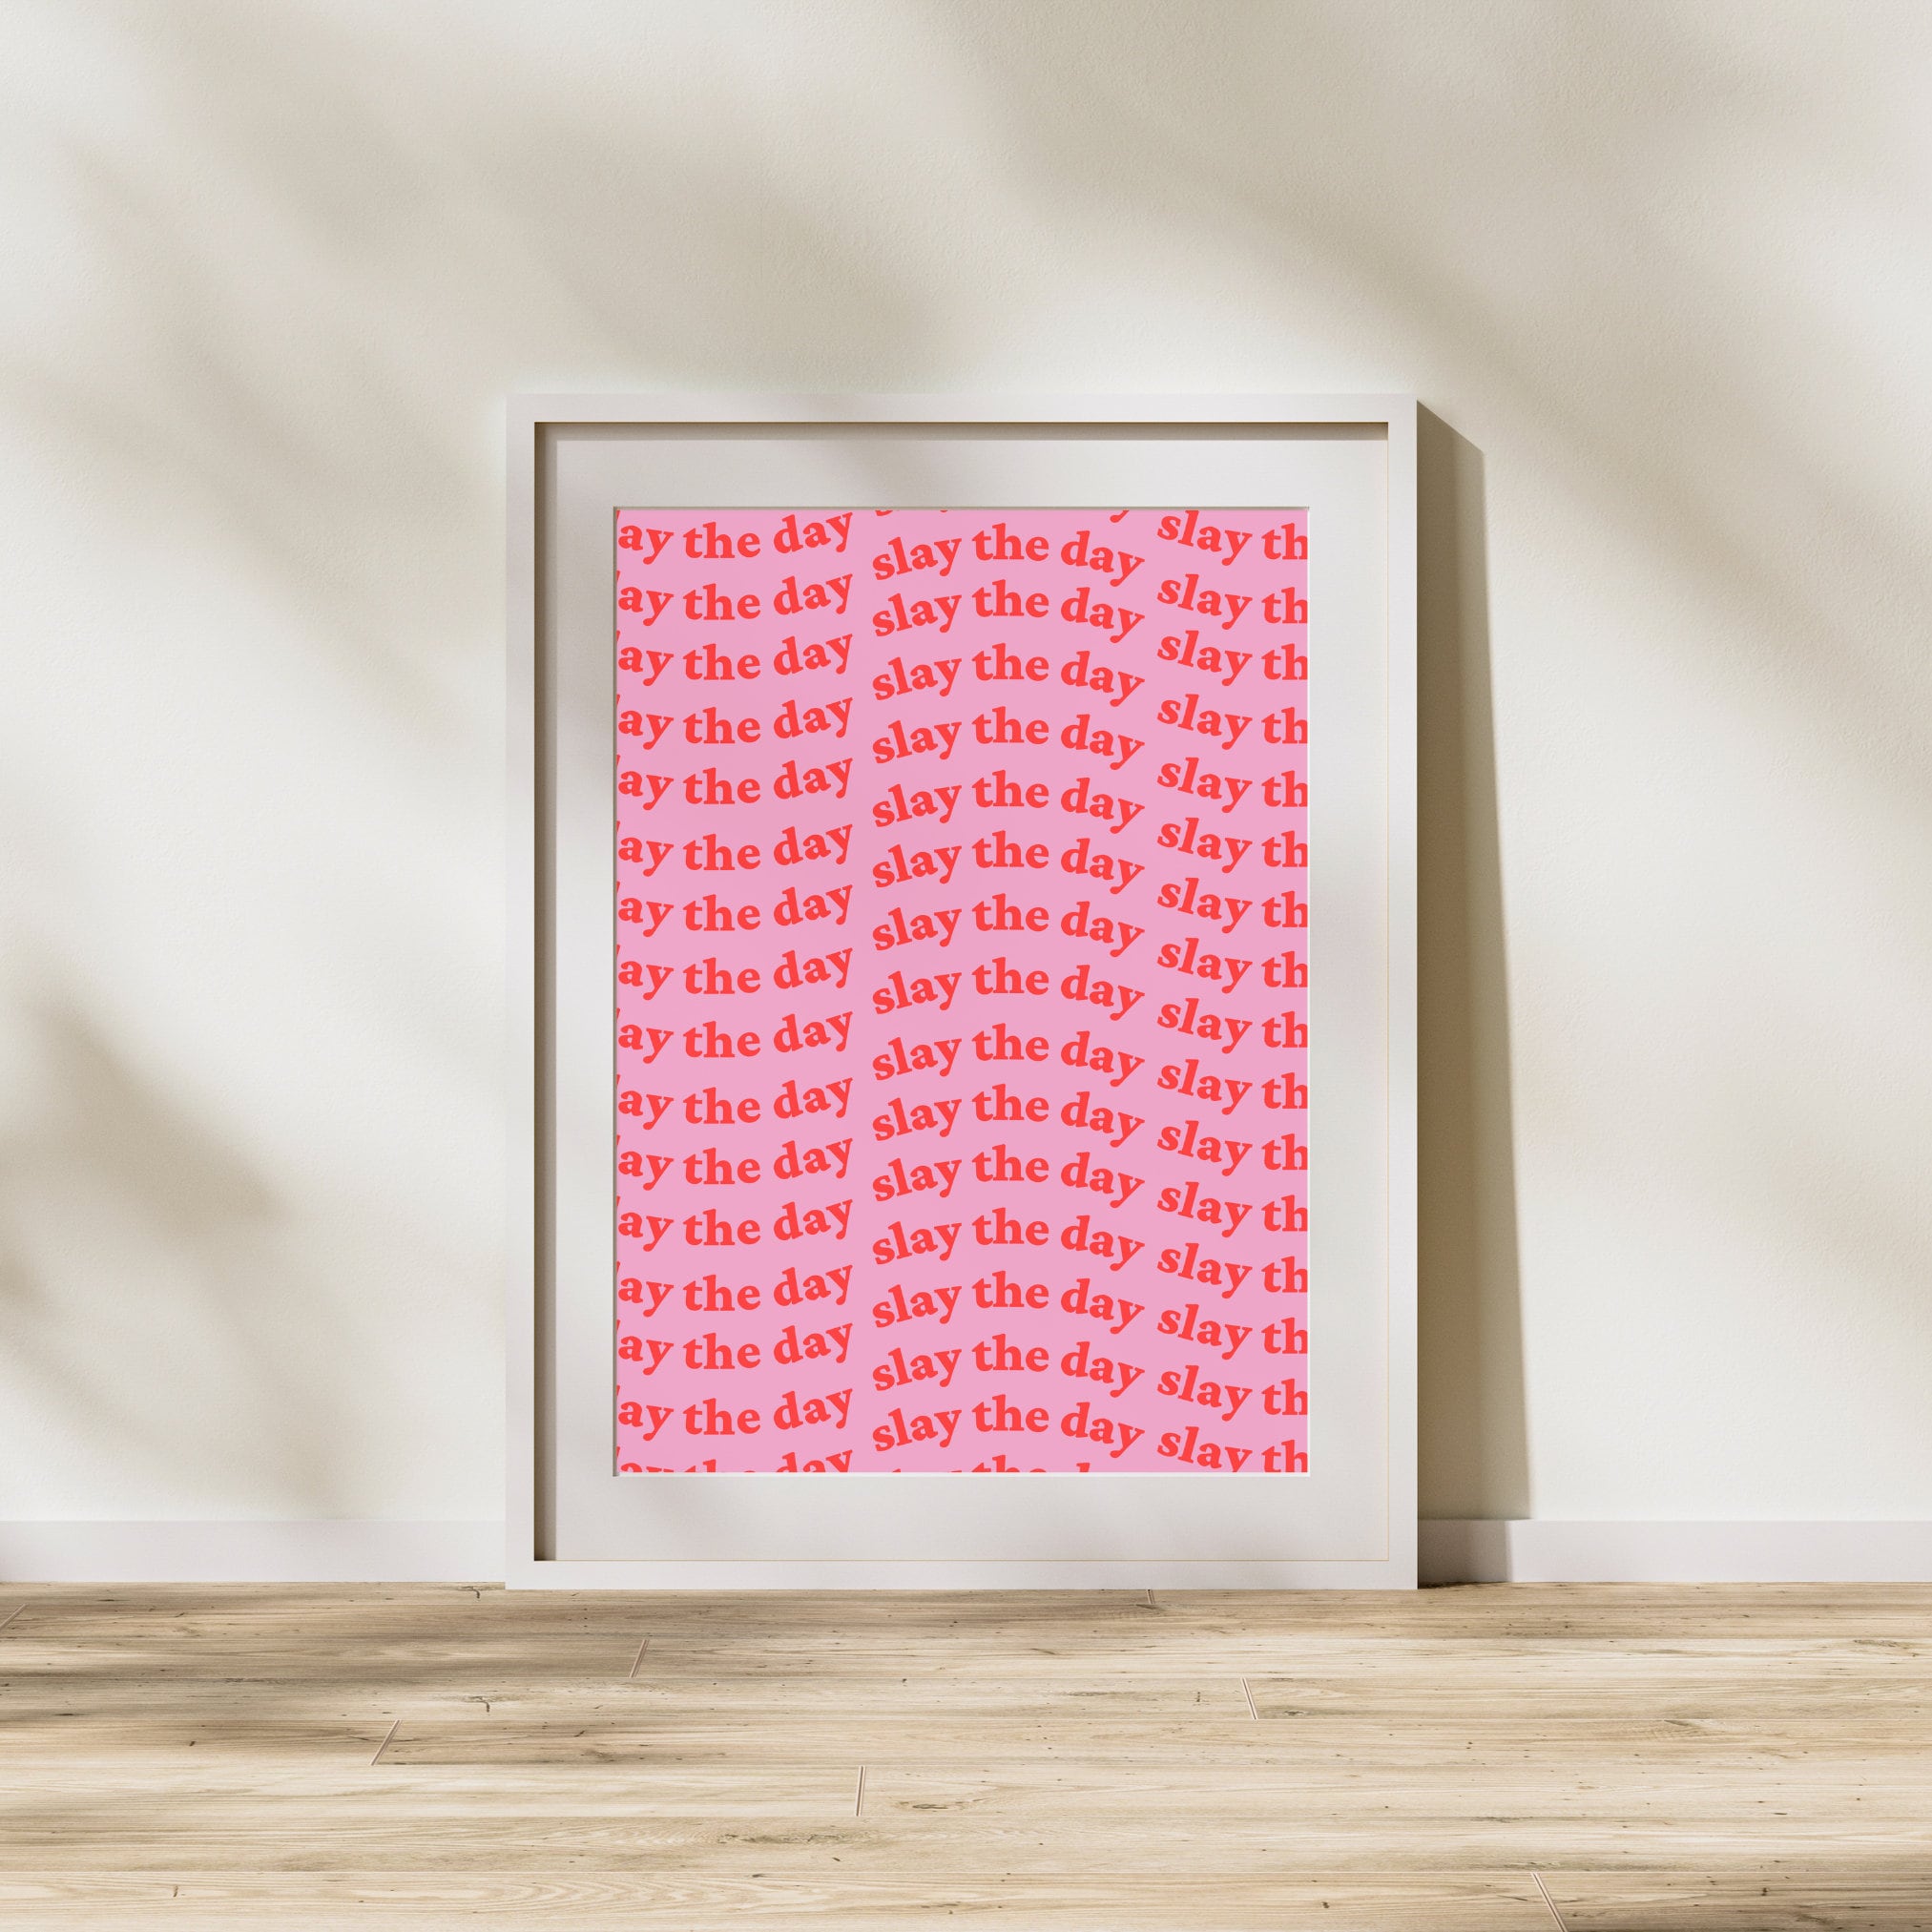  Slay definition - Unframed art print poster or greeting card :  Handmade Products